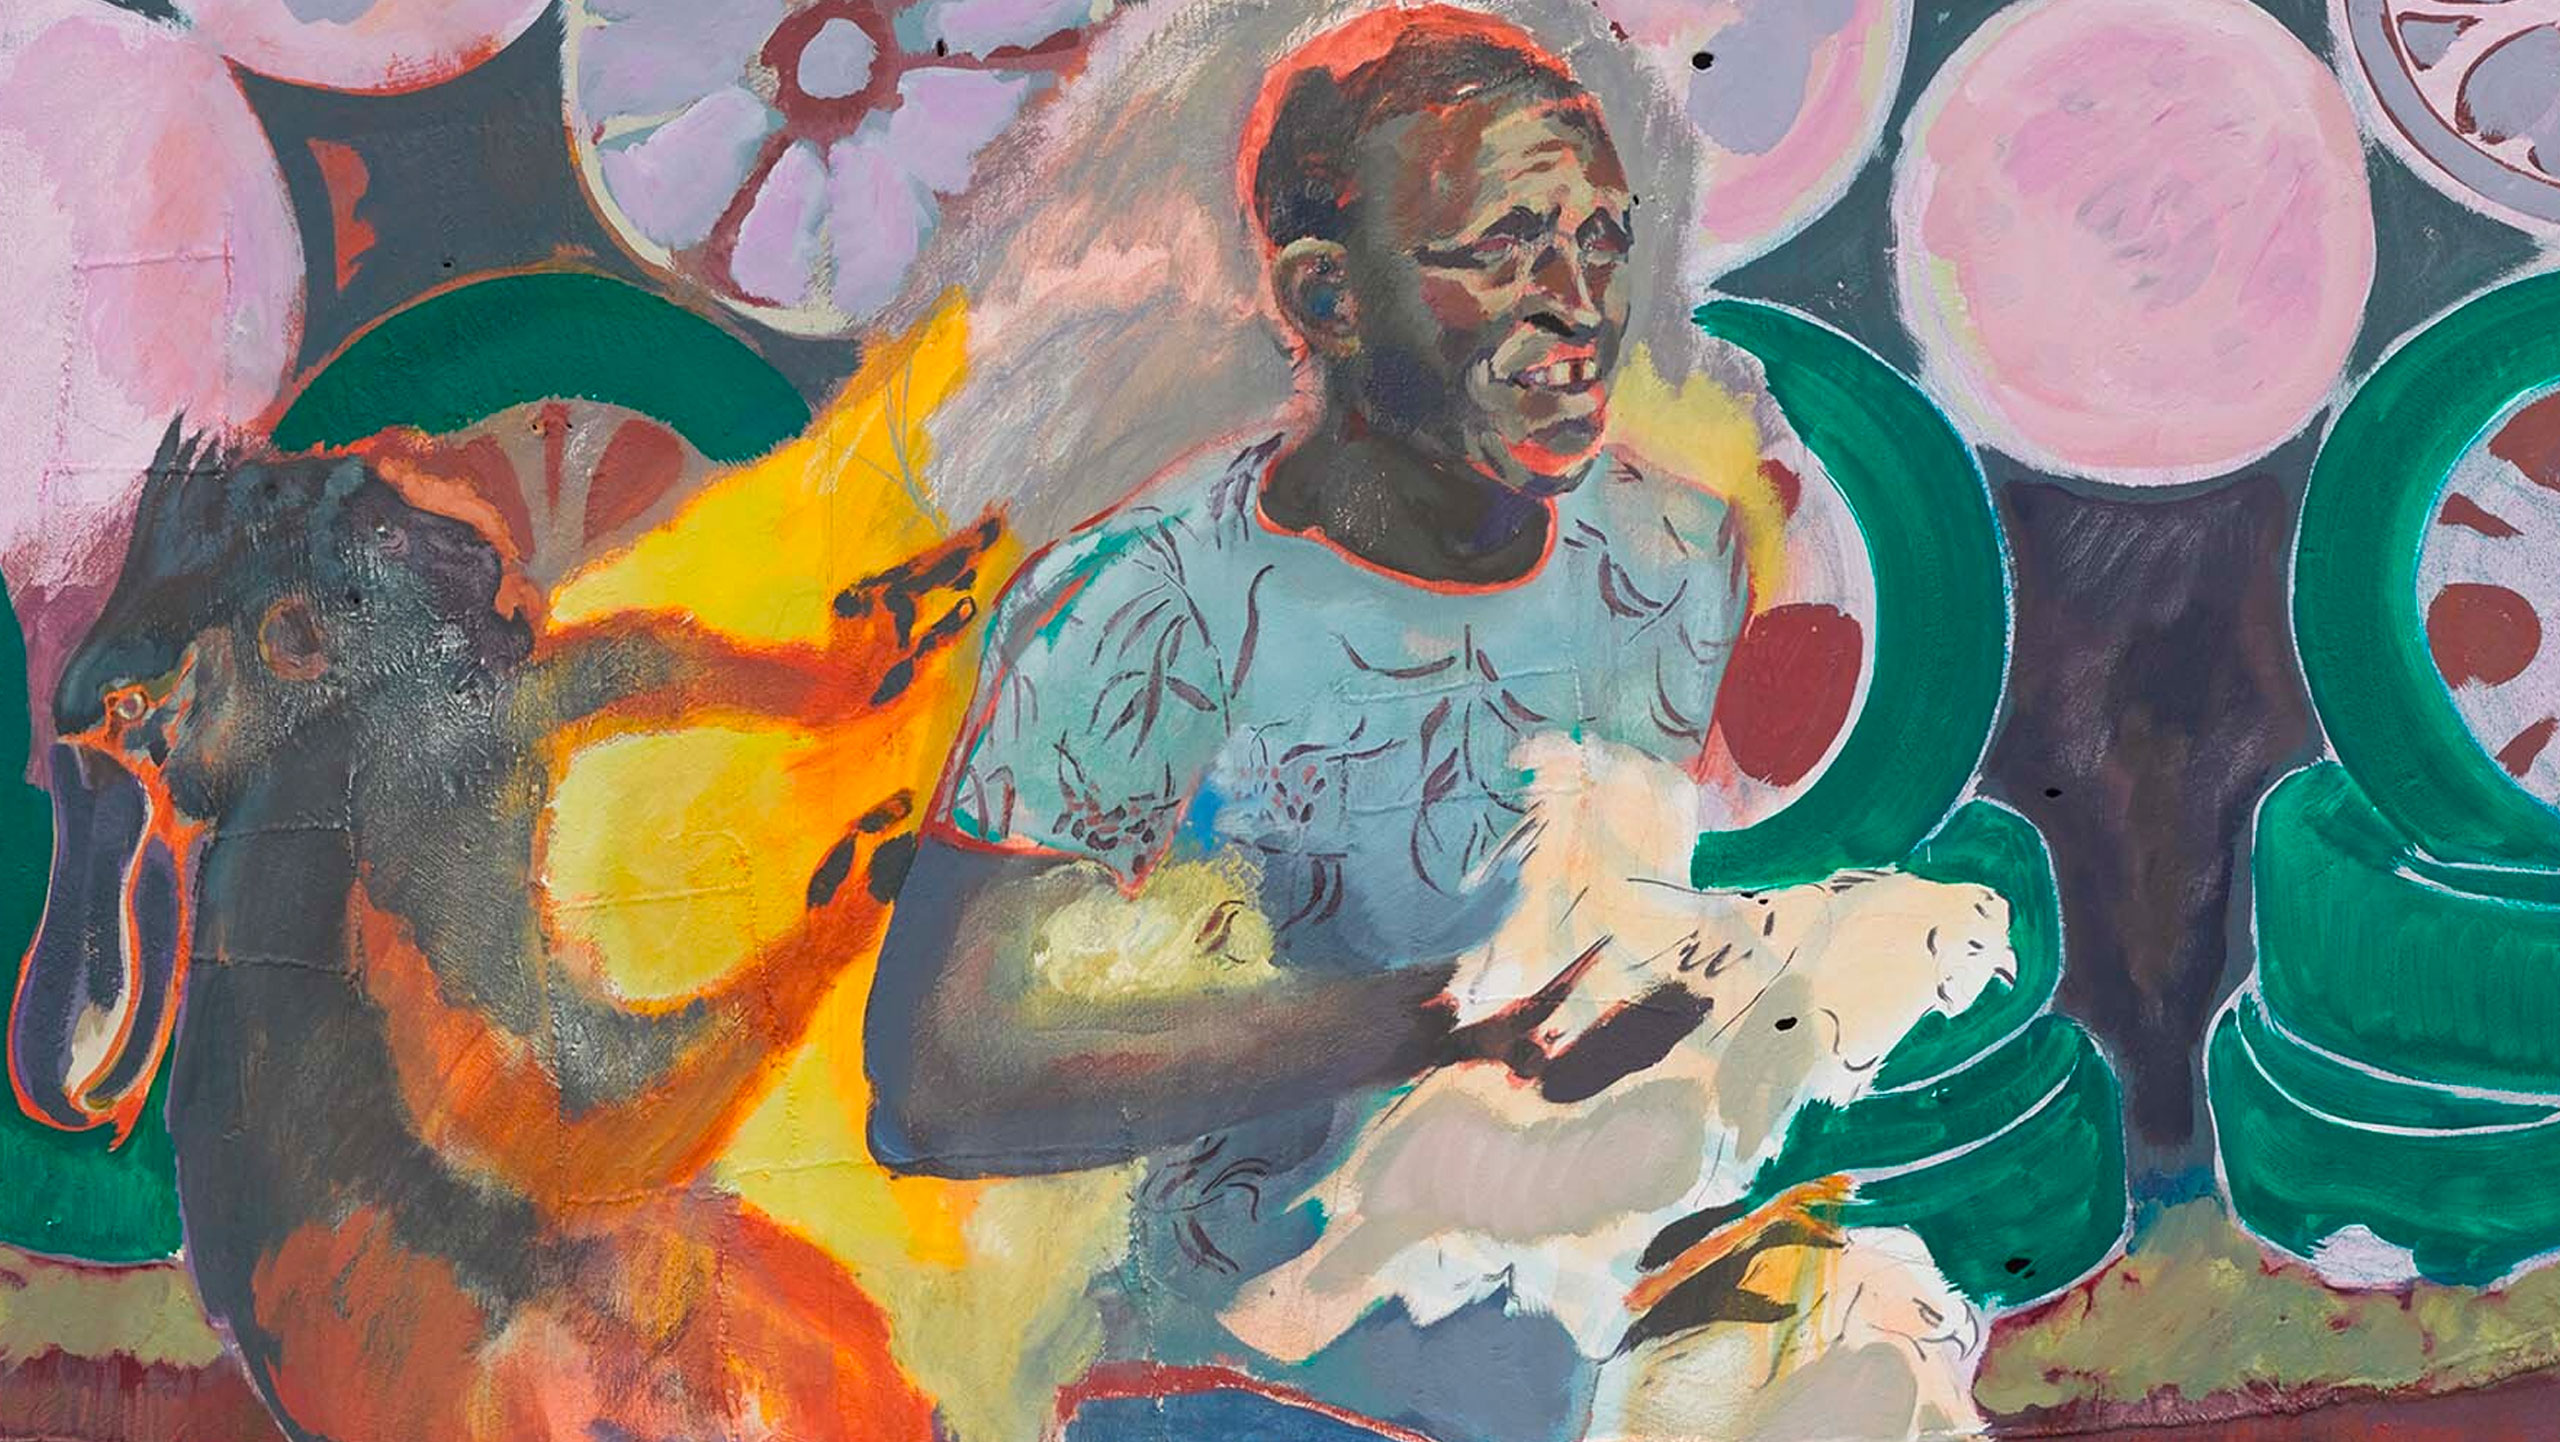 A detail of a painting by Michael Armitage, titled The Chicken Thief, dated 2019.